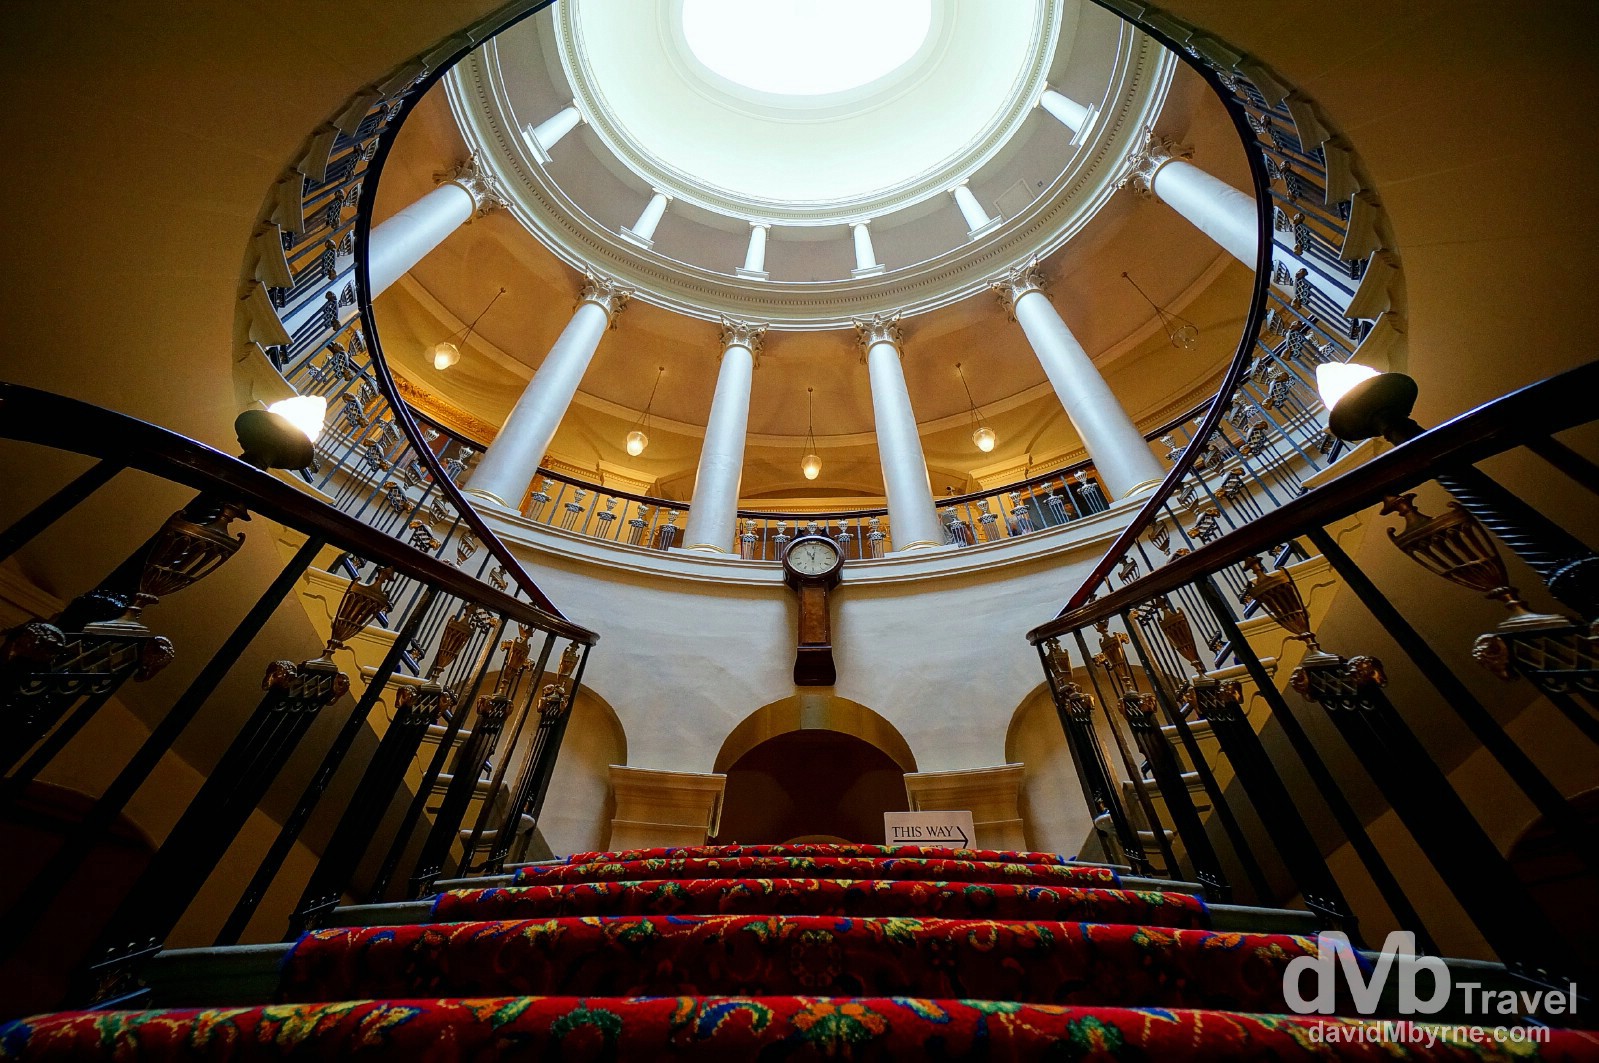 The amazing Oval Staircase of Culzean Castle, Ayrshire, Scotland. September 19, 2014. 